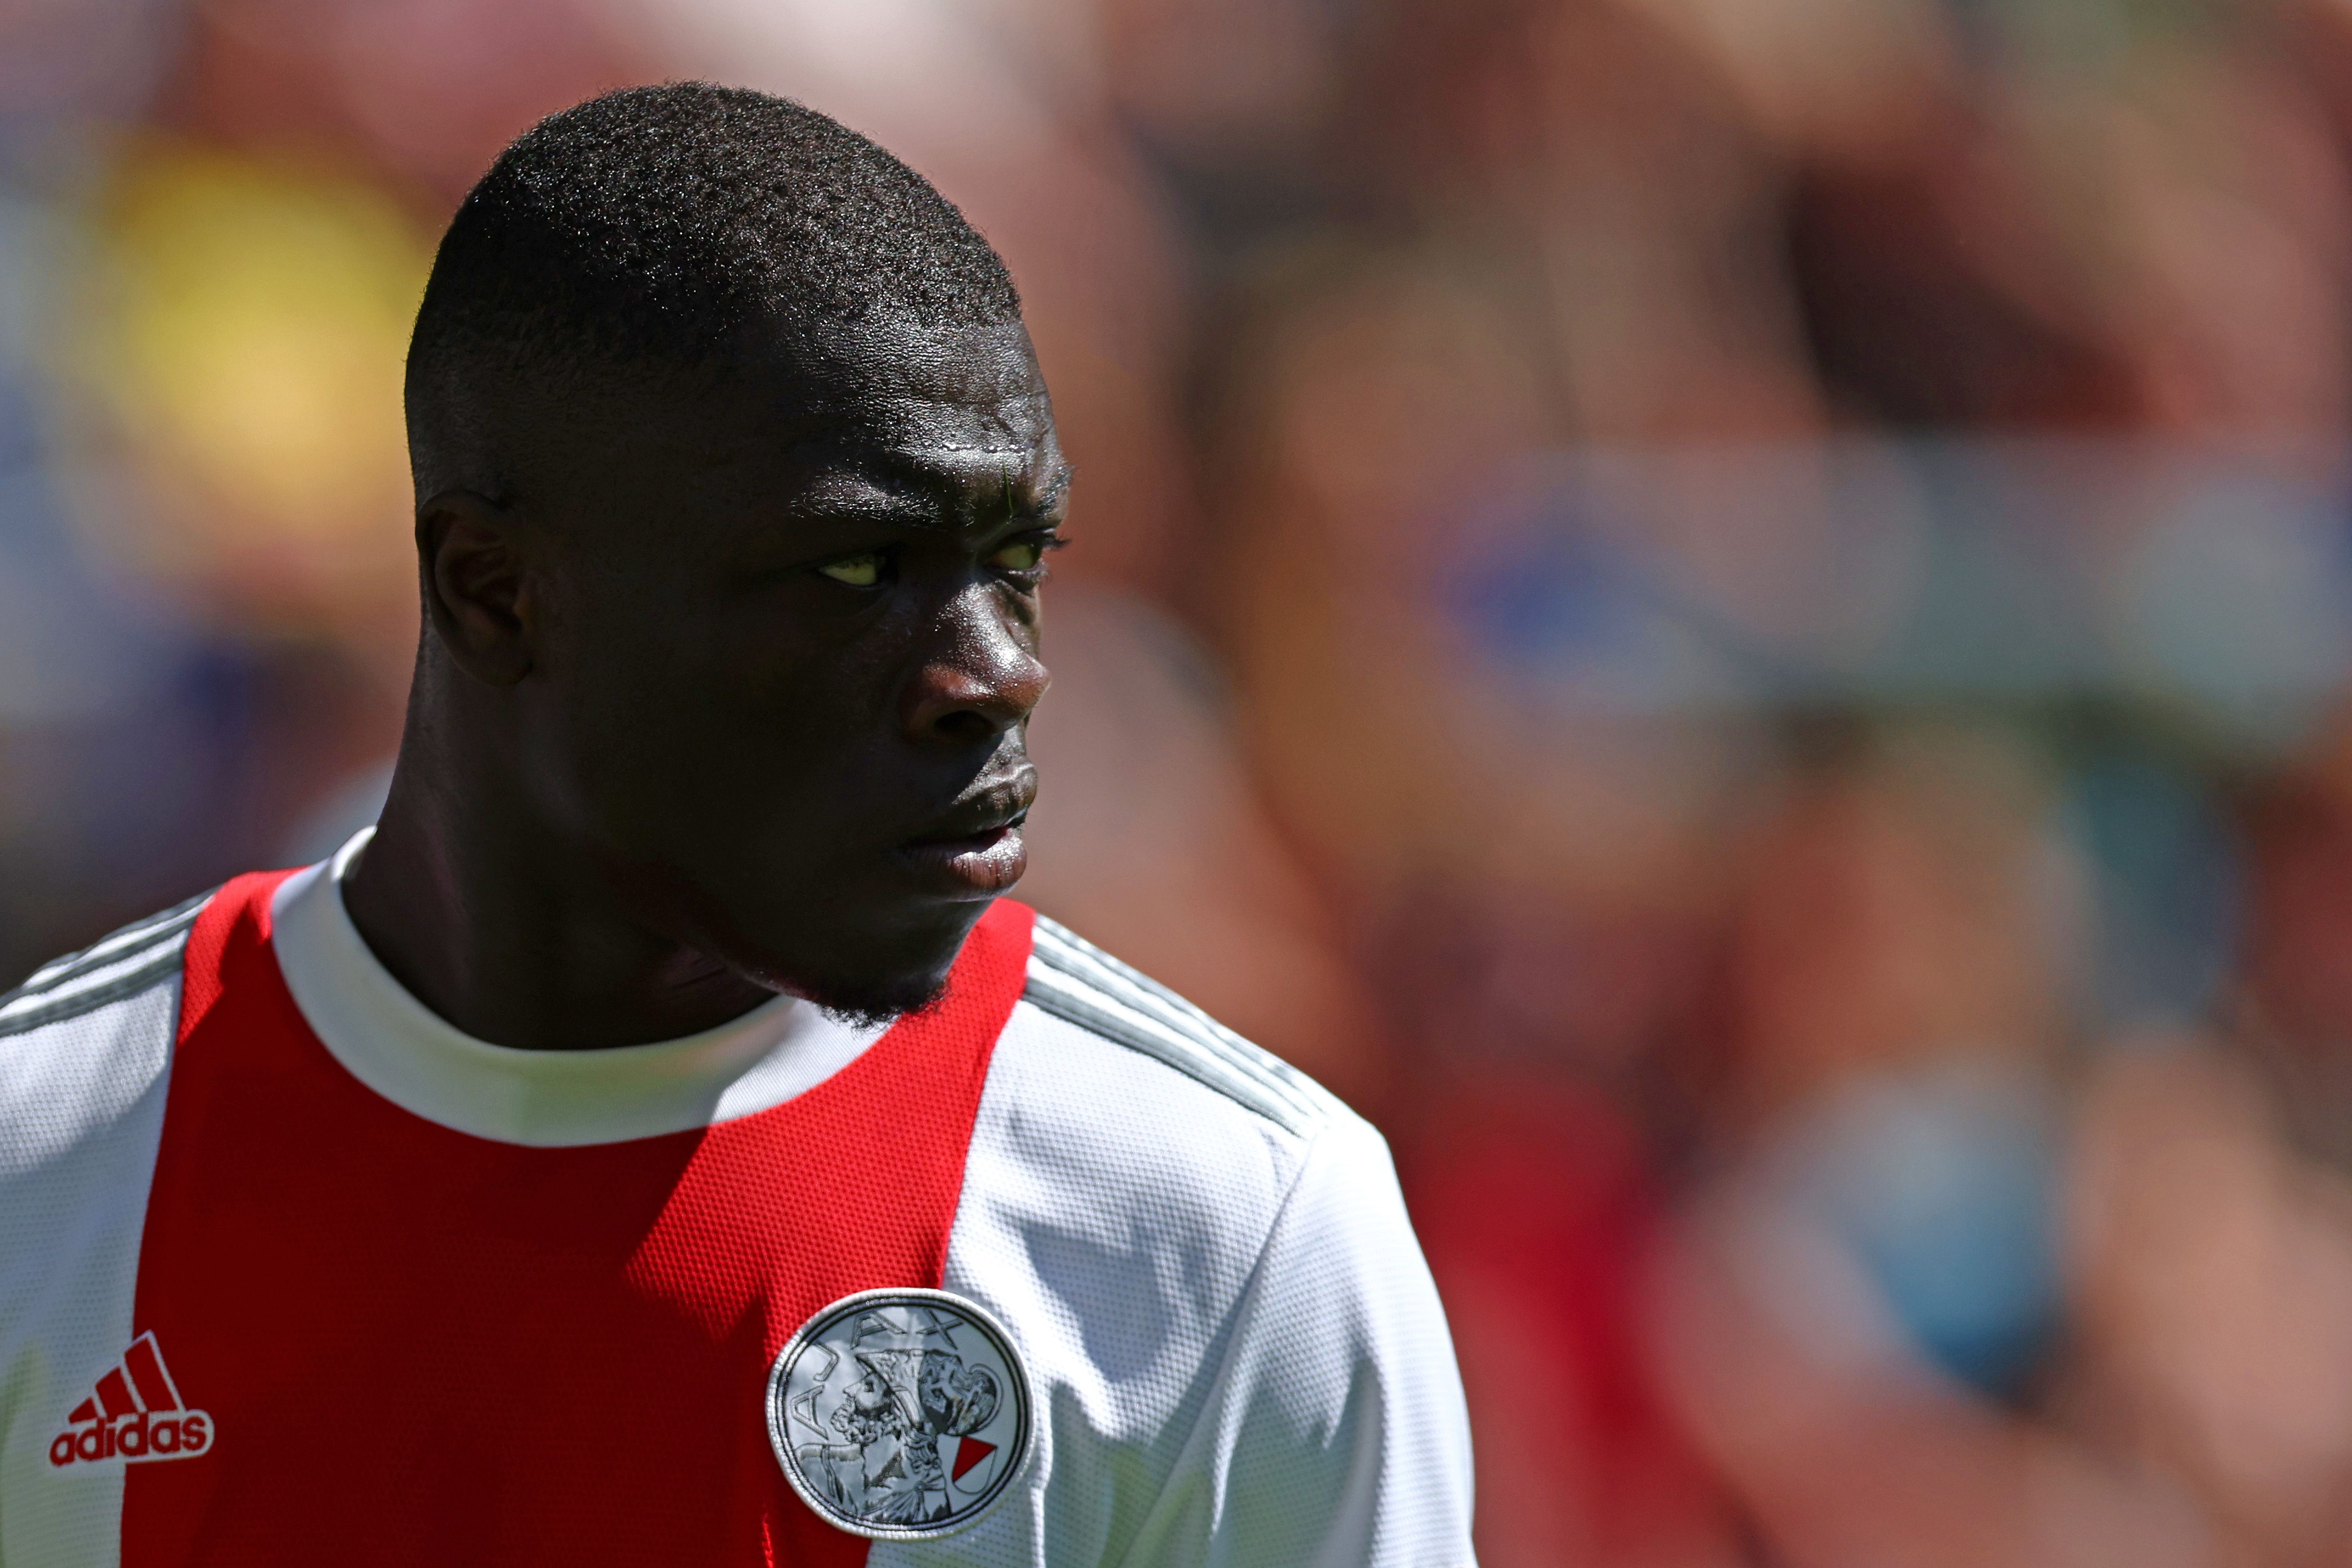 Brian Brobbey of AFC Ajax looks on during the Dutch Eredivisie match between Vitesse and Ajax Amsterdam held at Gelredome on May 15, 2022 in Arnhem, Netherlands.